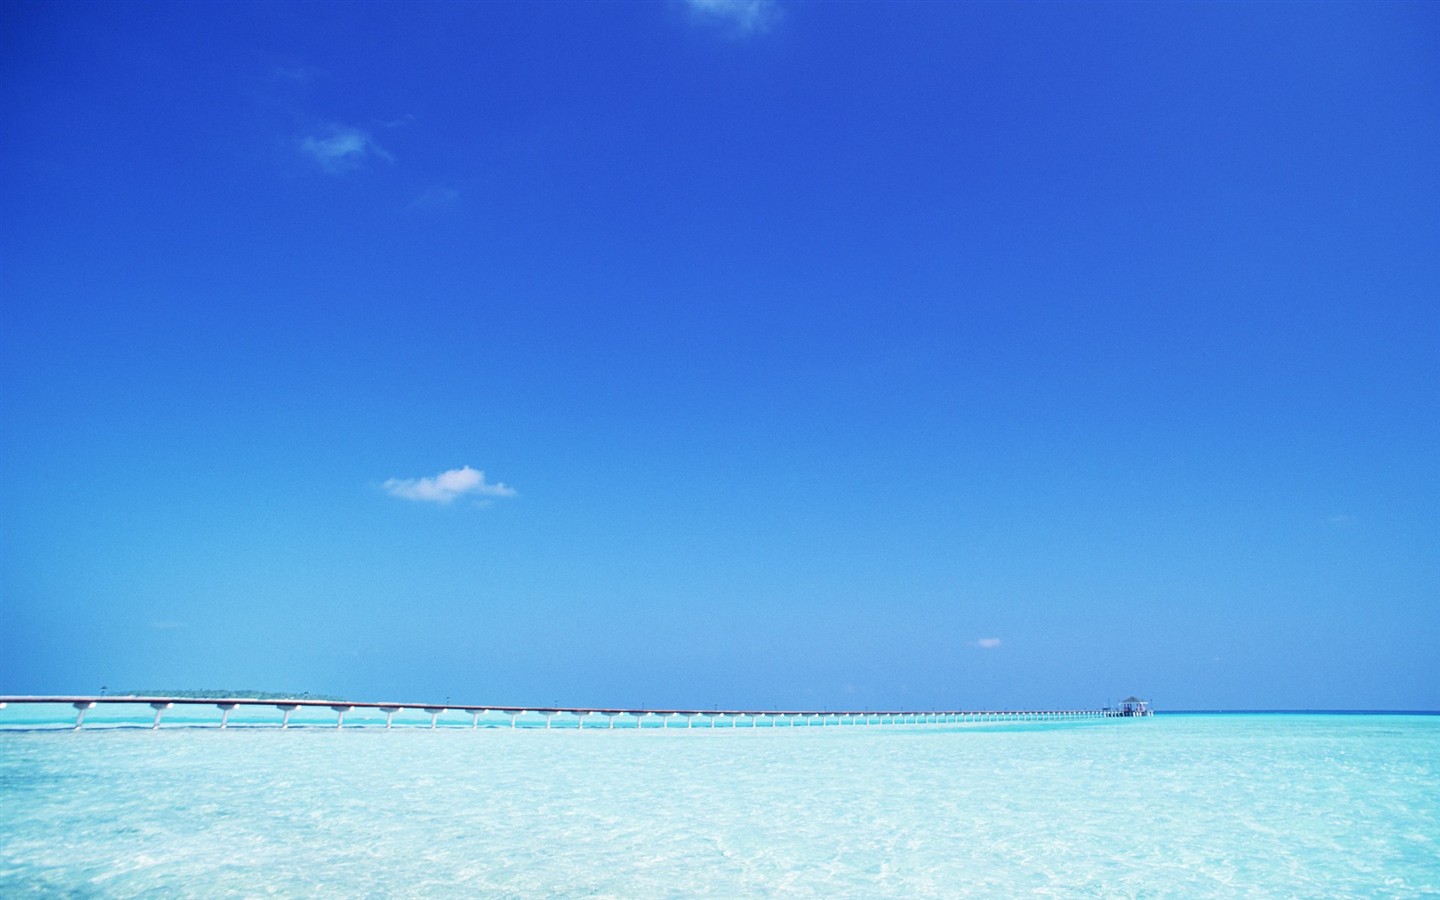 Maldives water and blue sky #22 - 1440x900